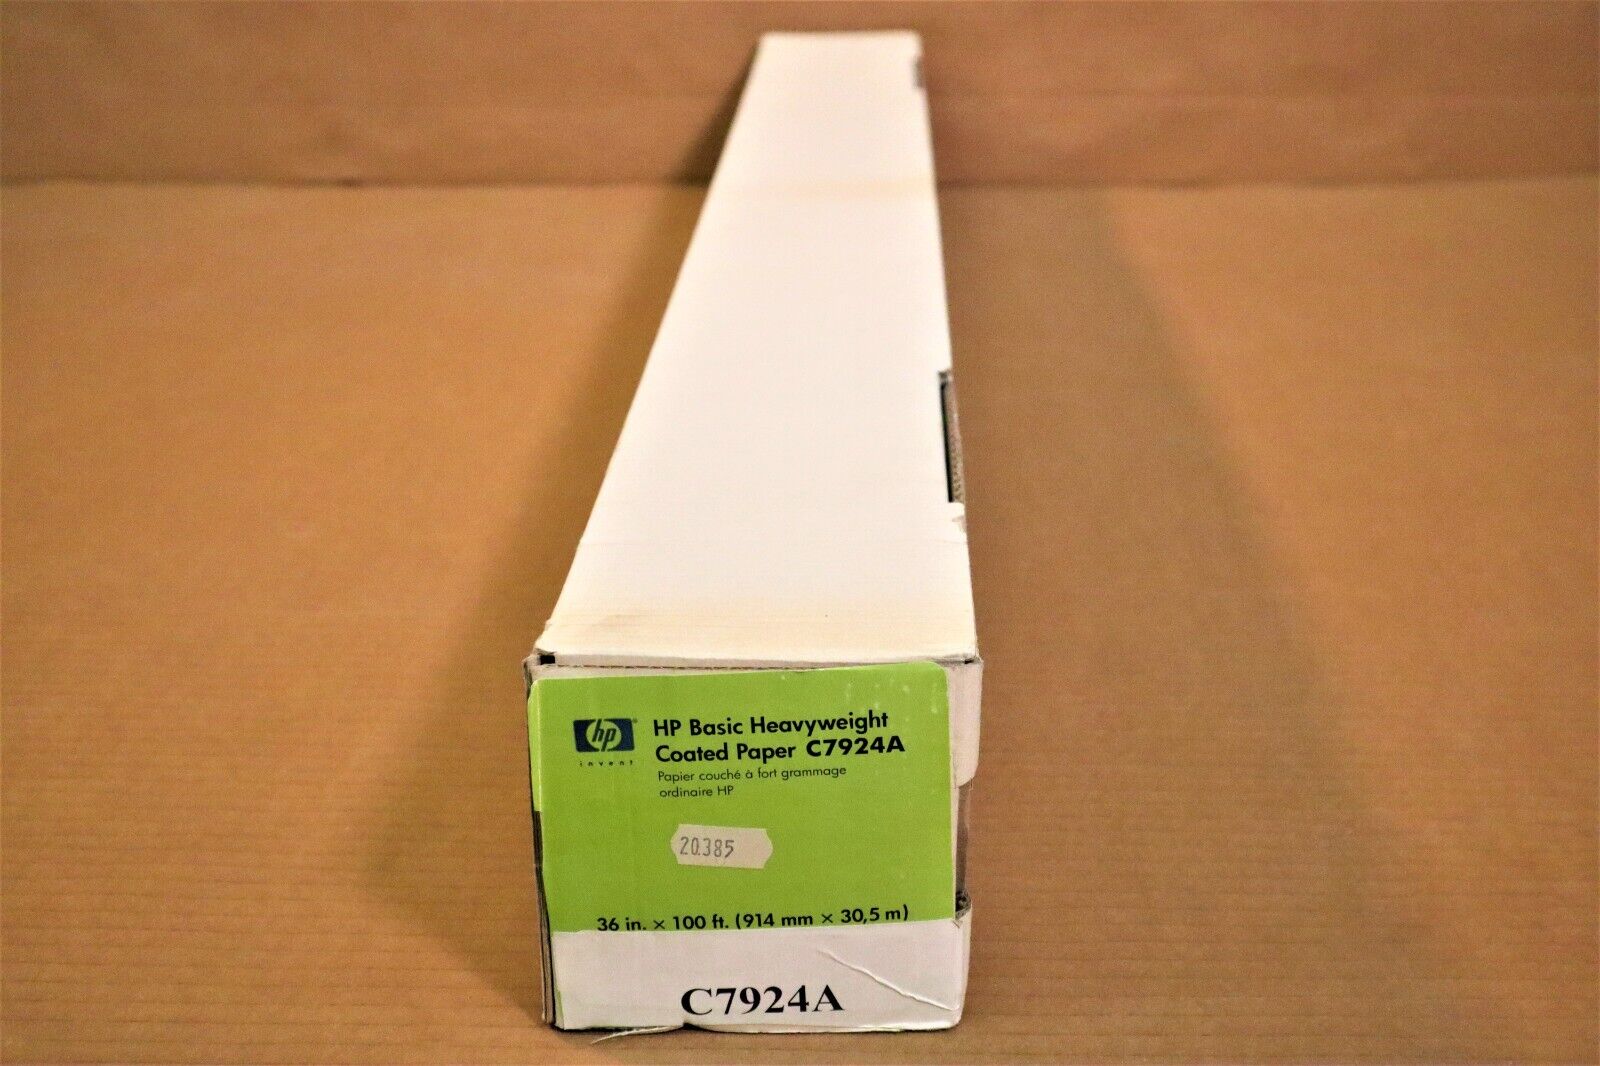 HP C7924A Heavyweight Coated Paper Roll 36in X 100ft Same Day Shipping